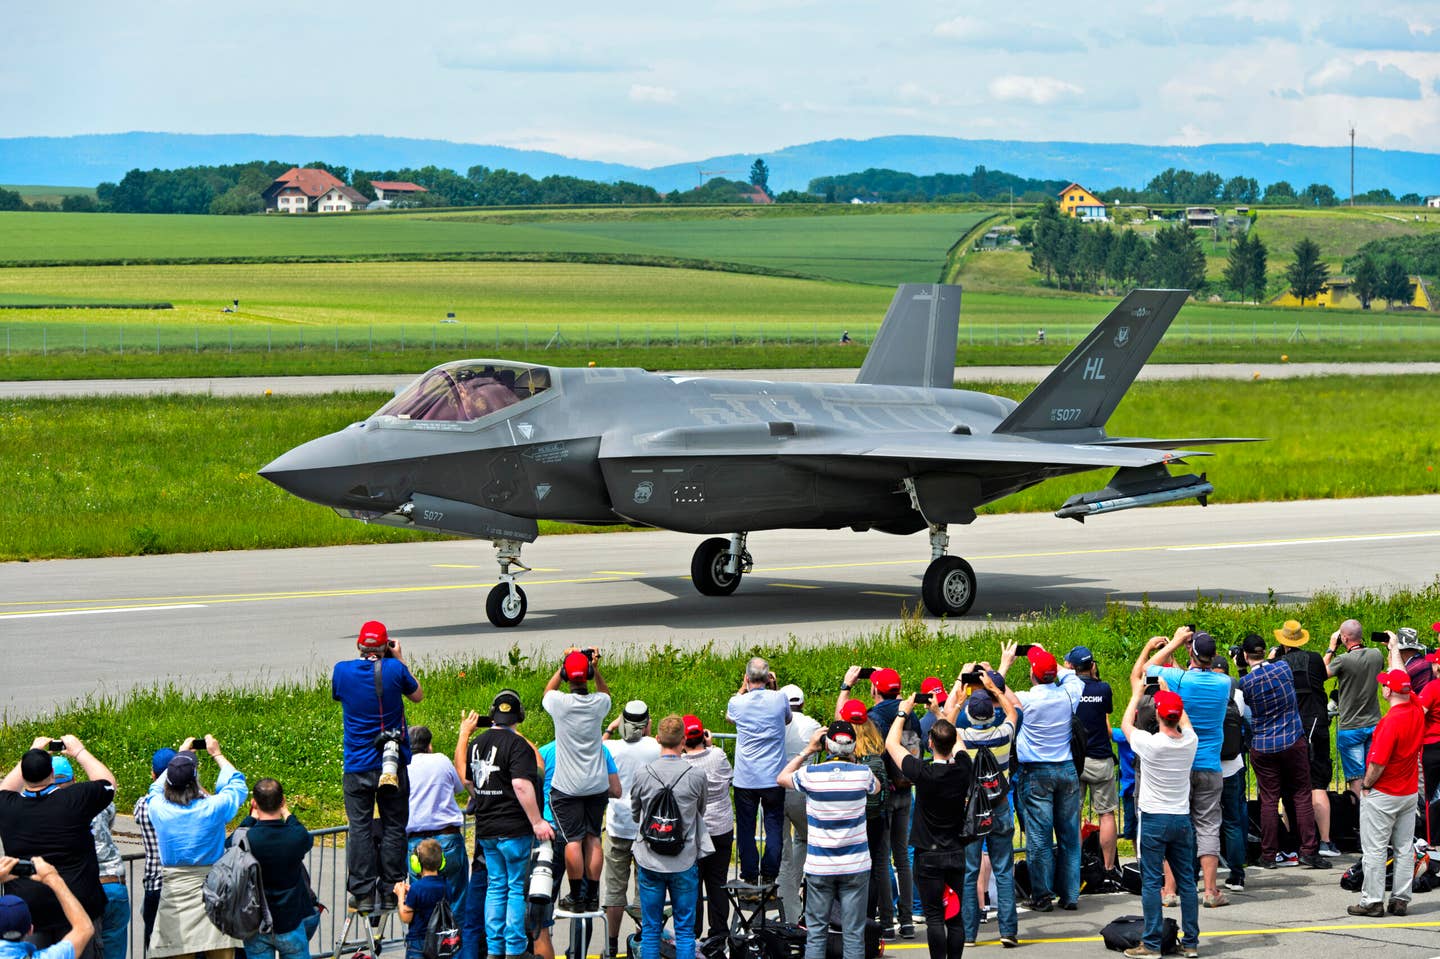 Locals welcome an F-35A of the U.S. Air Force at Payerne military airfield in 2019 in the context of the AIR2030 procurement program of the Swiss Air Force. G<em>unter Fischer/Education Images/Universal Images Group via Getty Images</em>